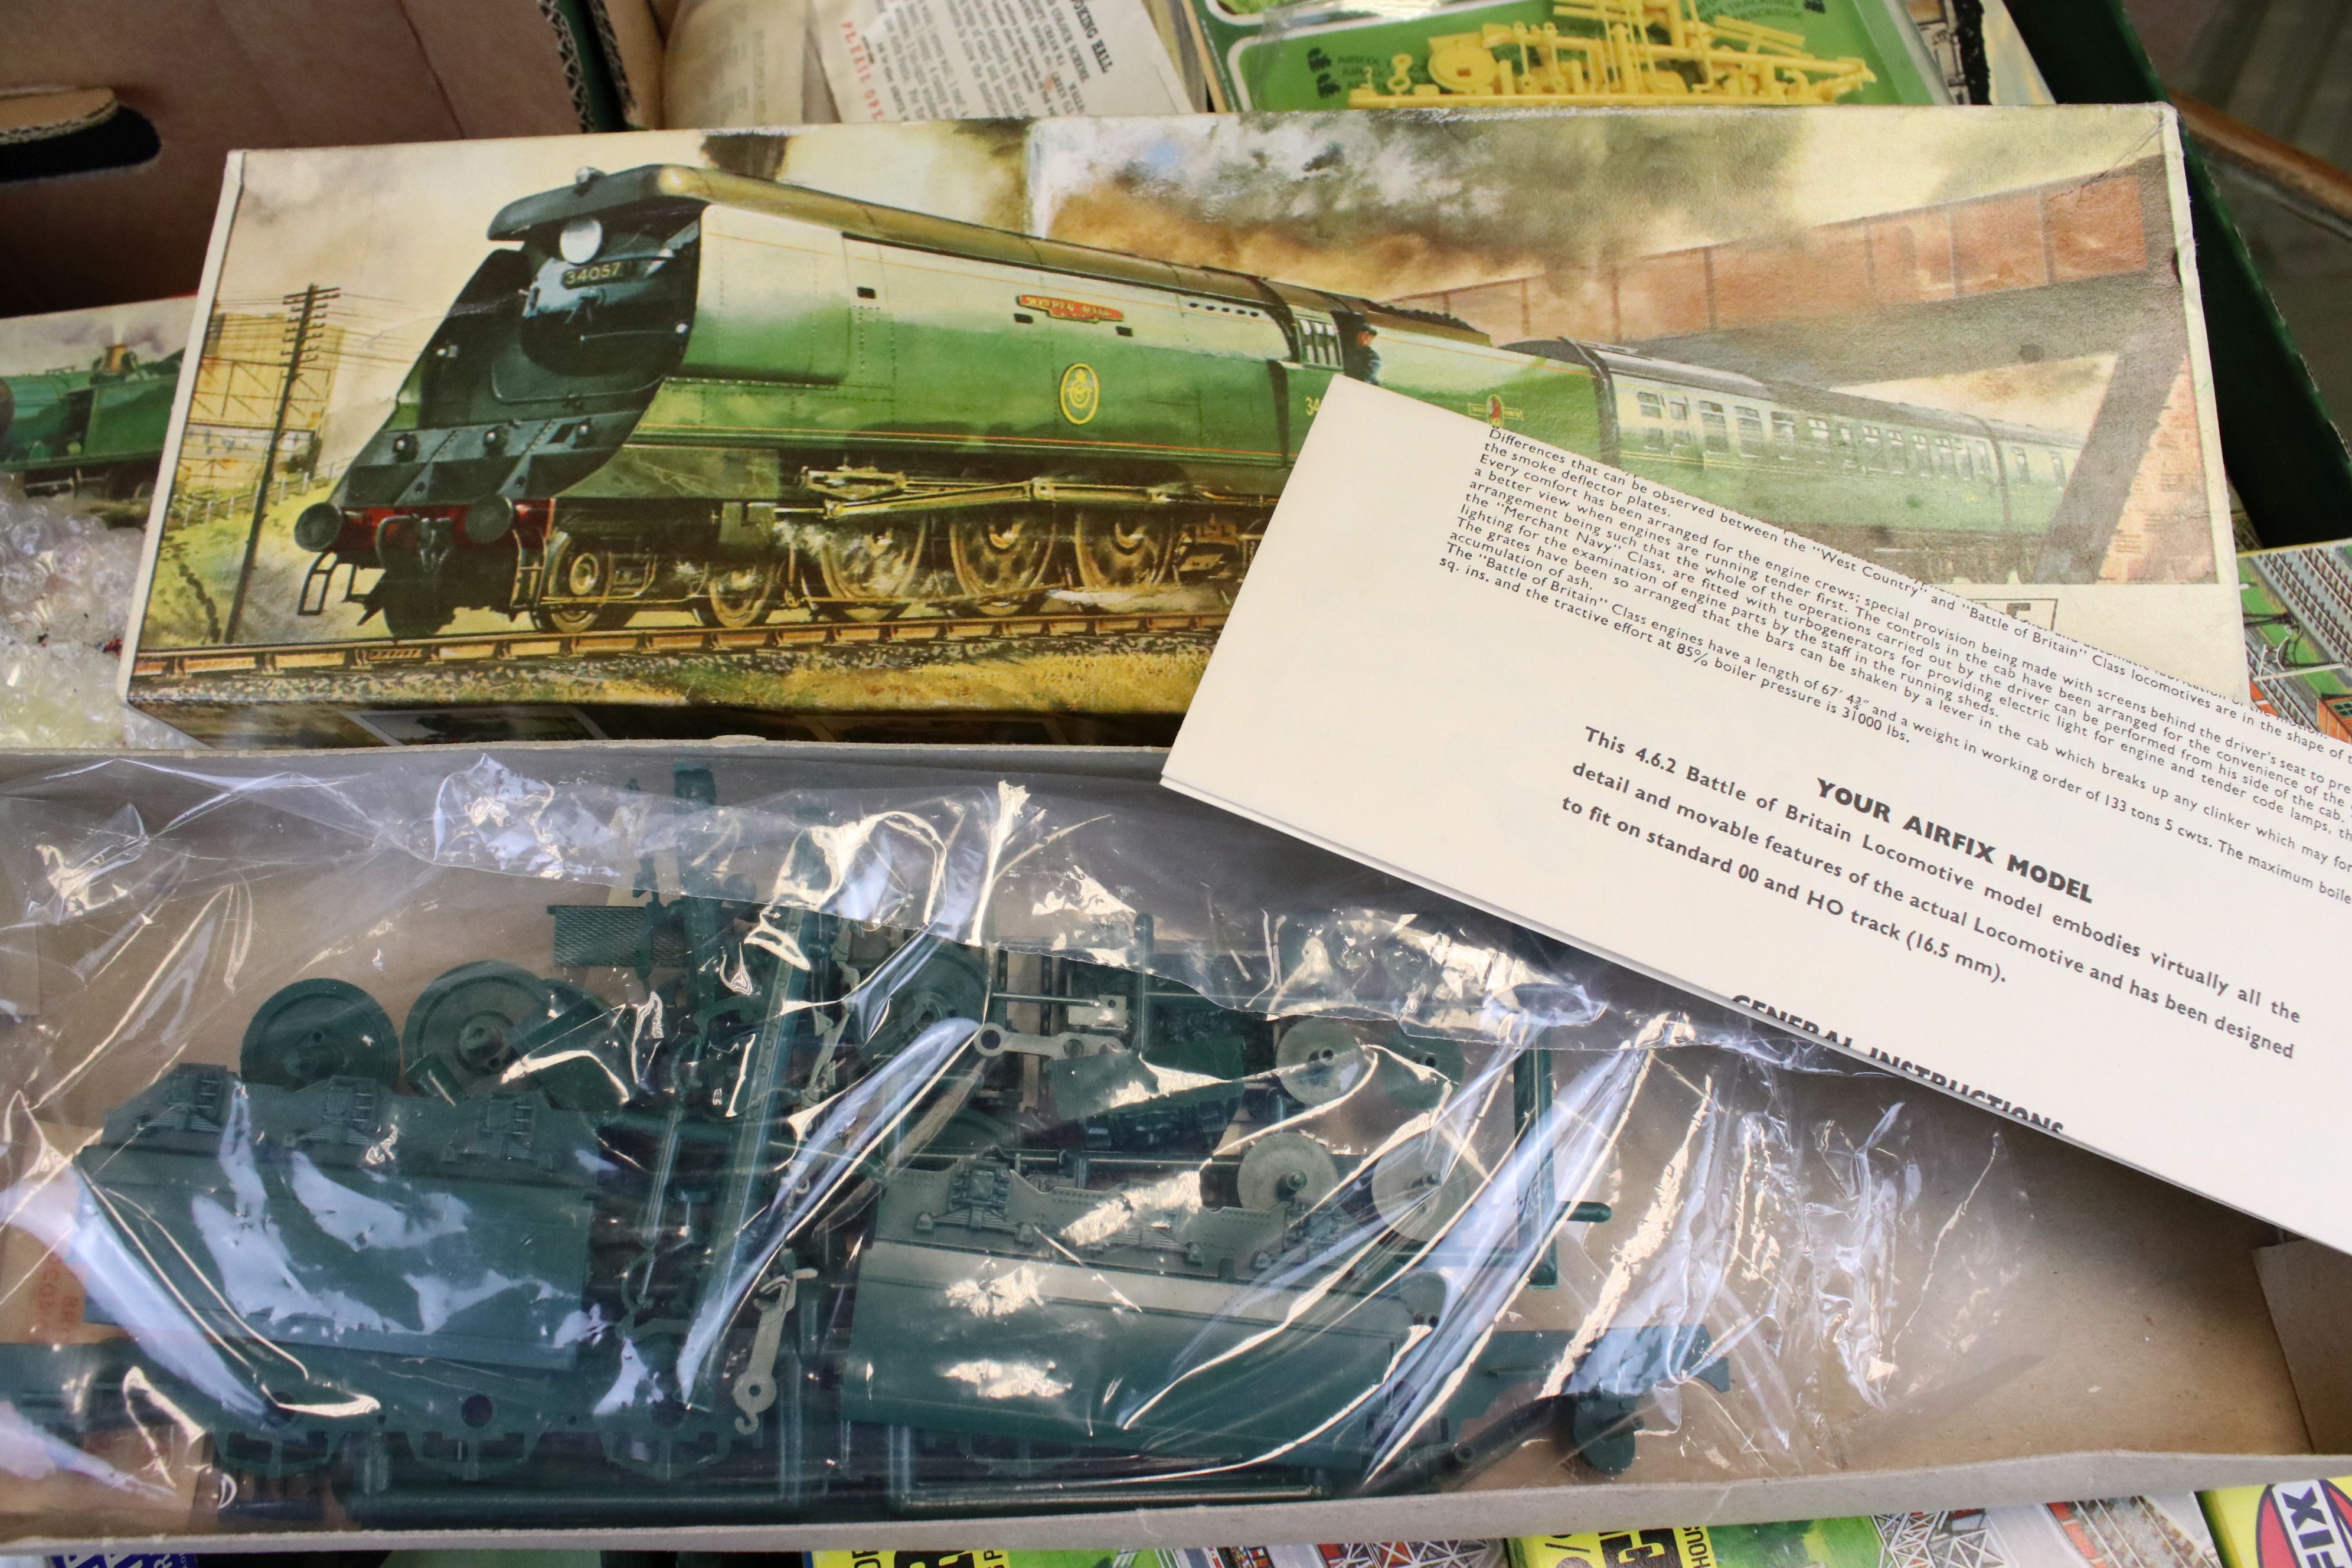 Airfix OO/HO - 44 Boxed & bagged Airfix plastic railway model kits to include 10 x locos (3 x 0-4- - Image 14 of 20